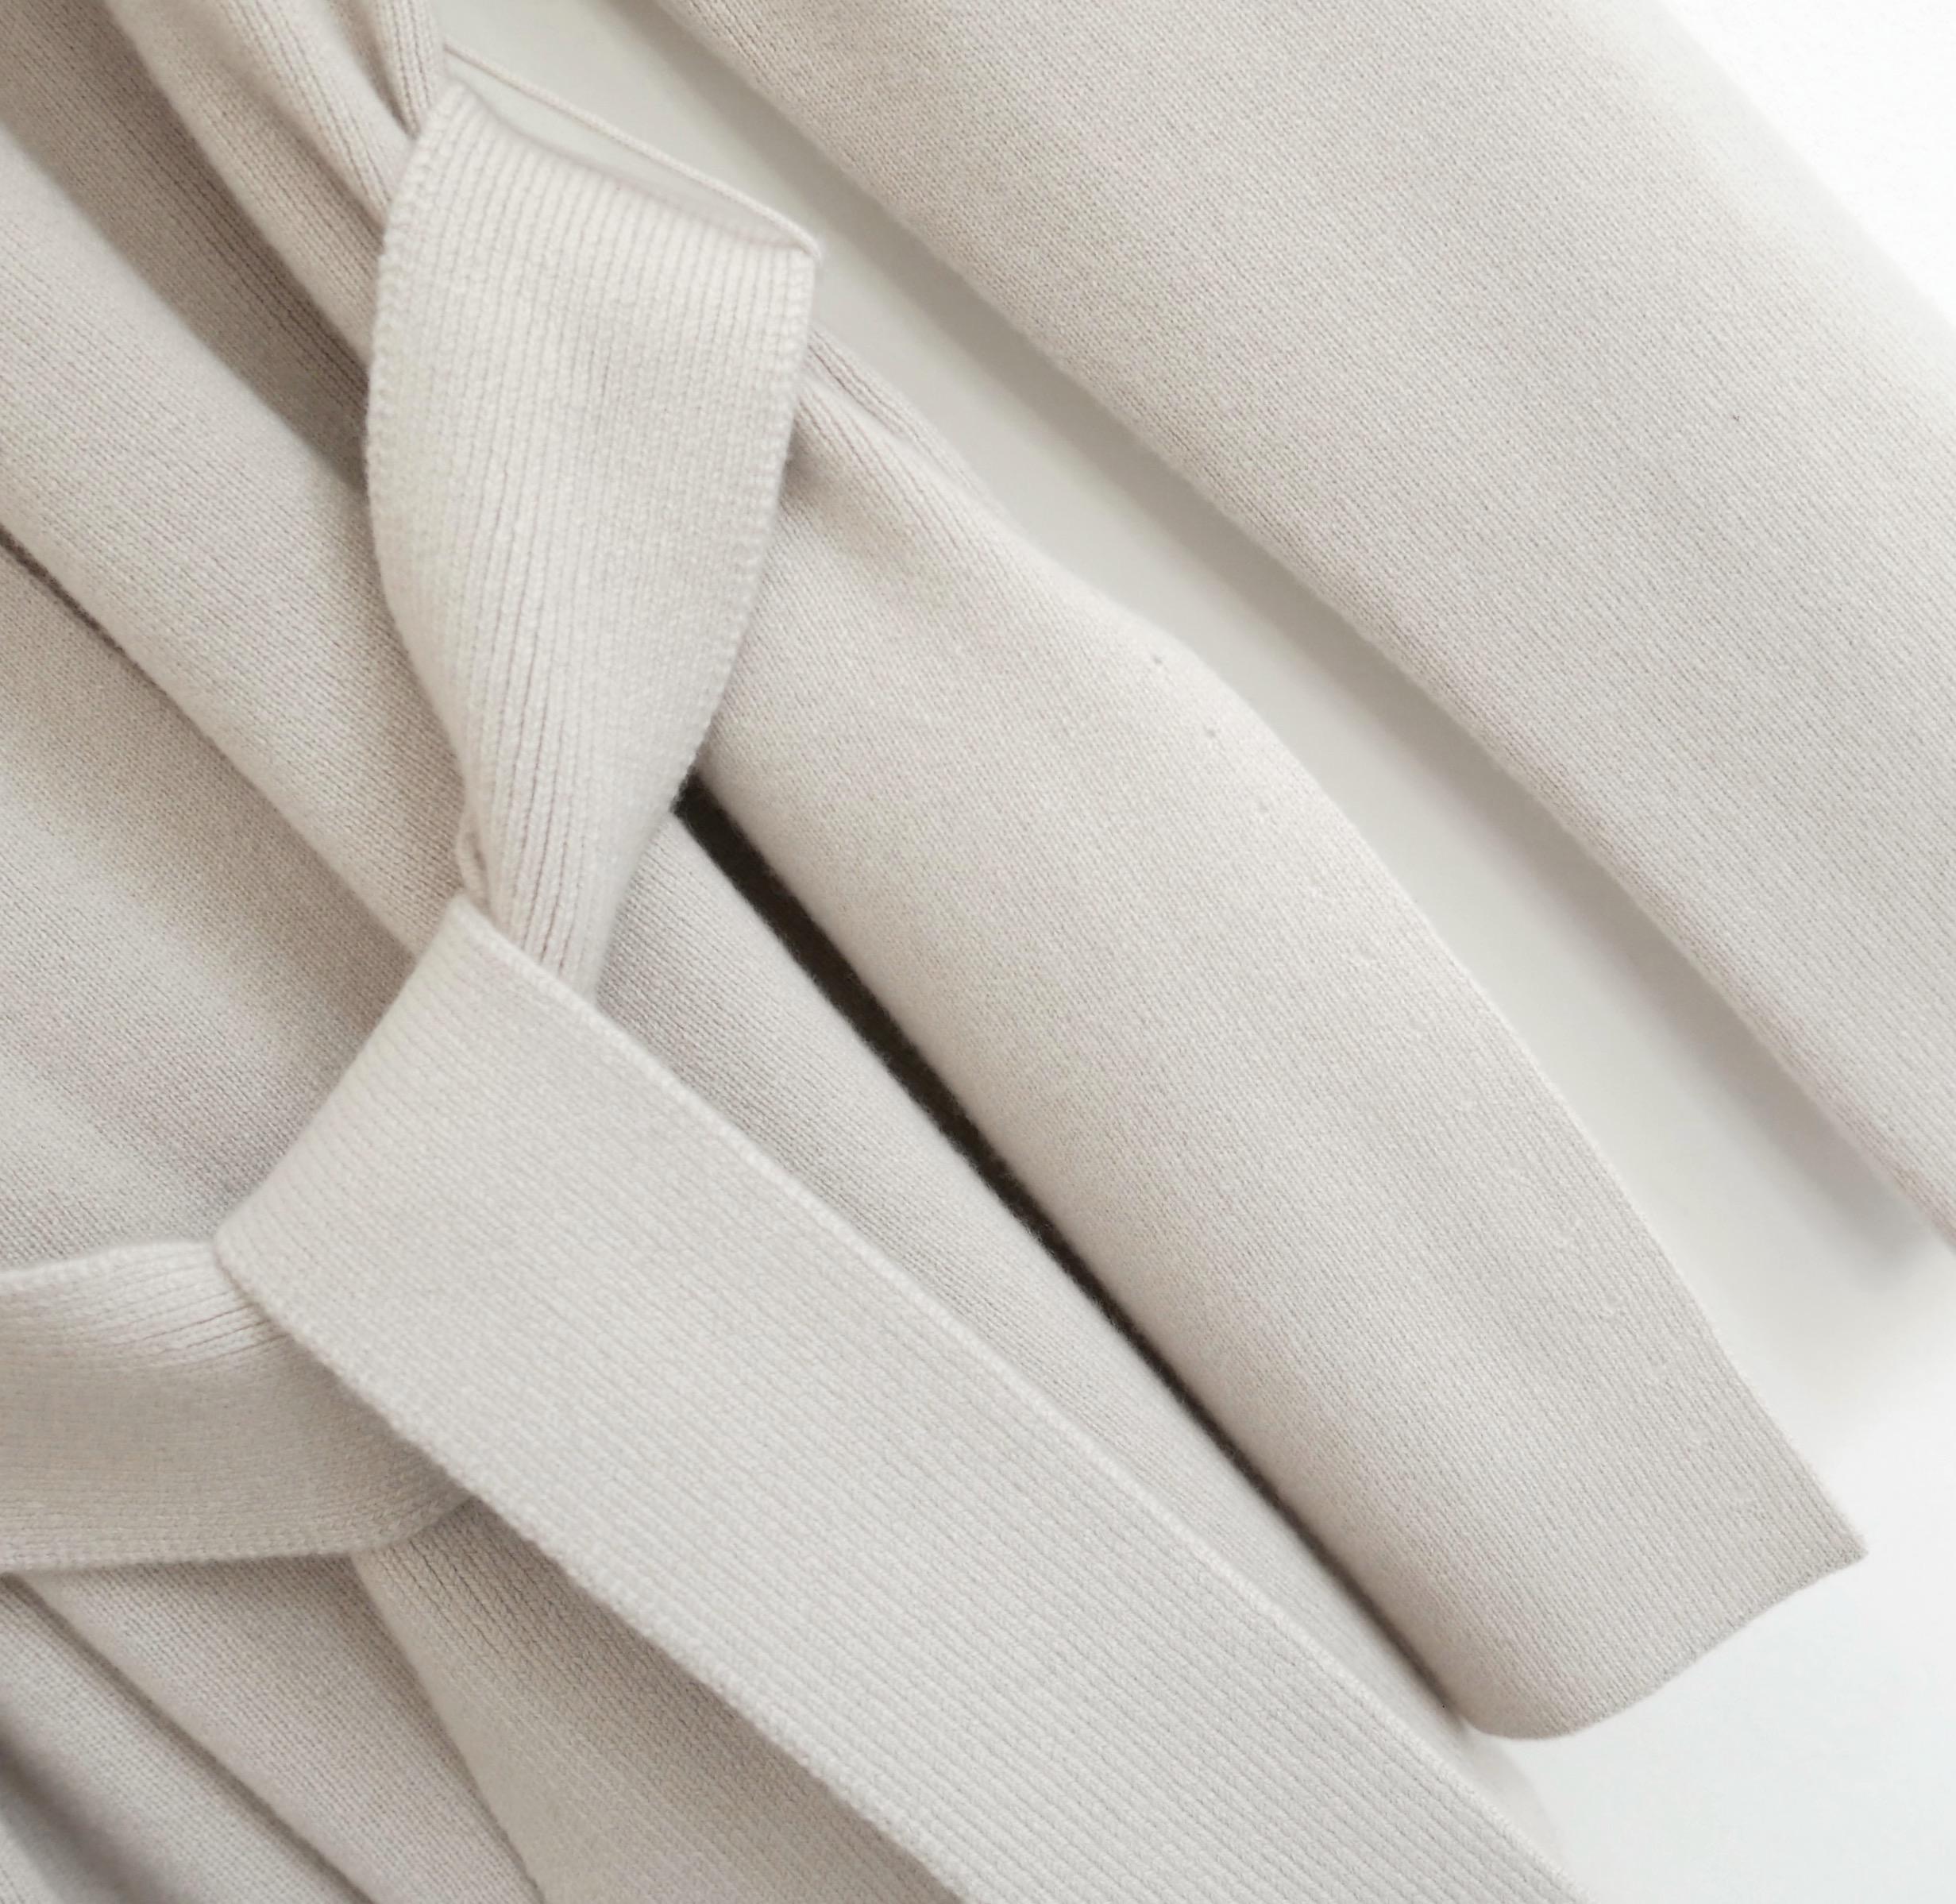 Luxe classic Loro Piana Introciato baby cashmere cardigan jacket. Bought for £2500 and new with tag/spare yarn. Made from smooth and soft greyish beige baby cashmere, it has beautiful kimono inspired cut with wide tie belt, slit side hems and